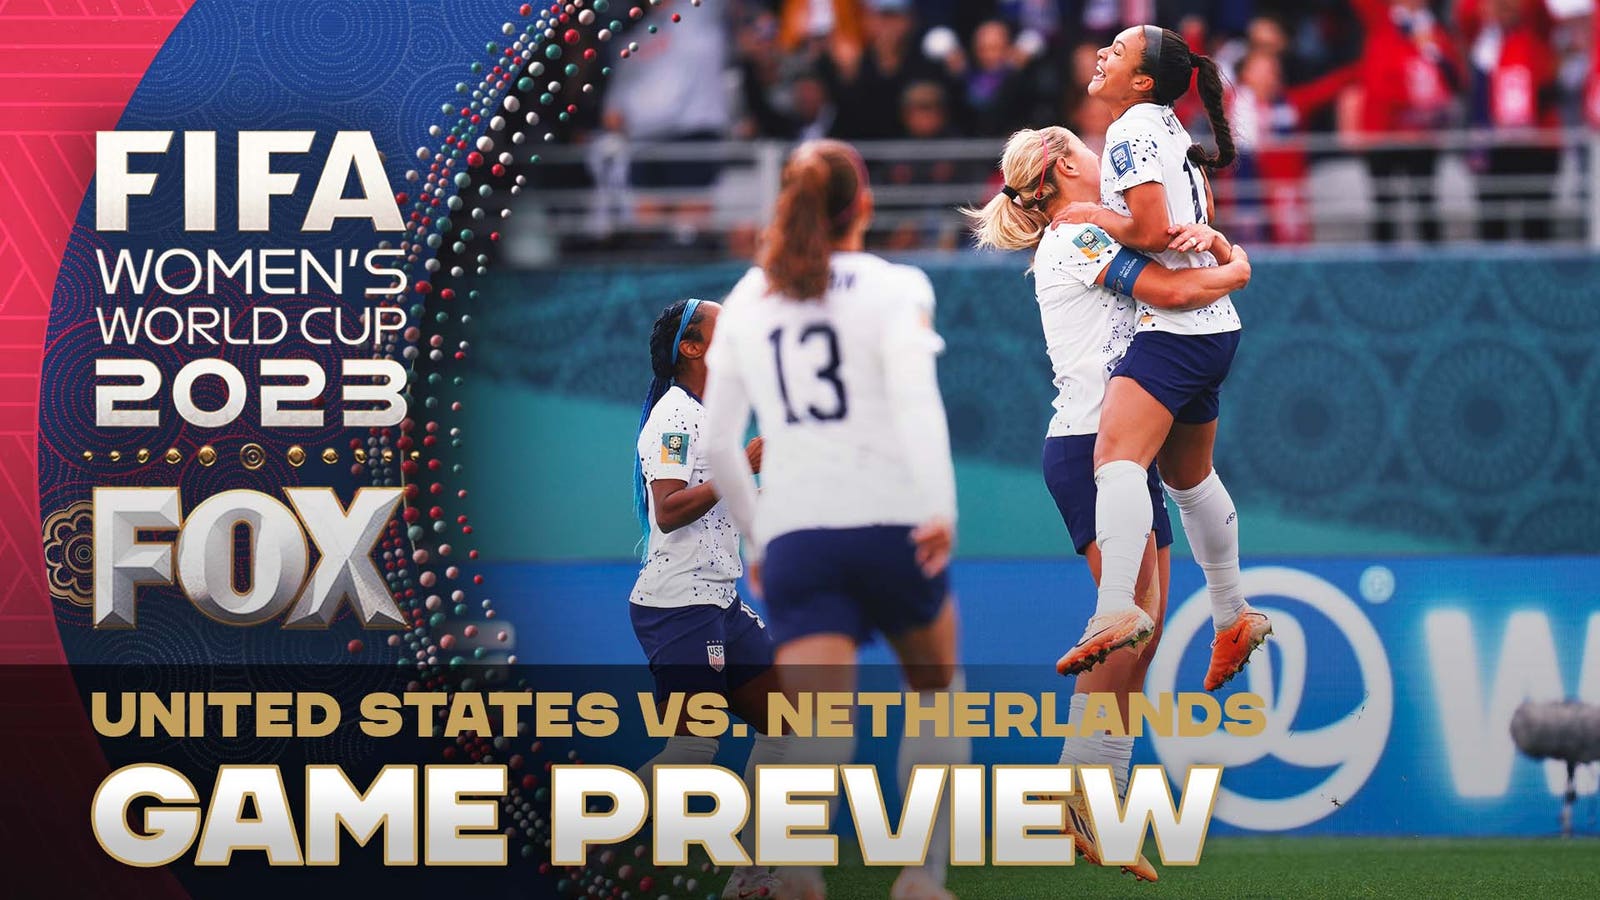 "First time that the US team will be tested defensively" - Ari Hingst on the USWNT's upcoming matchup vs. Netherlands